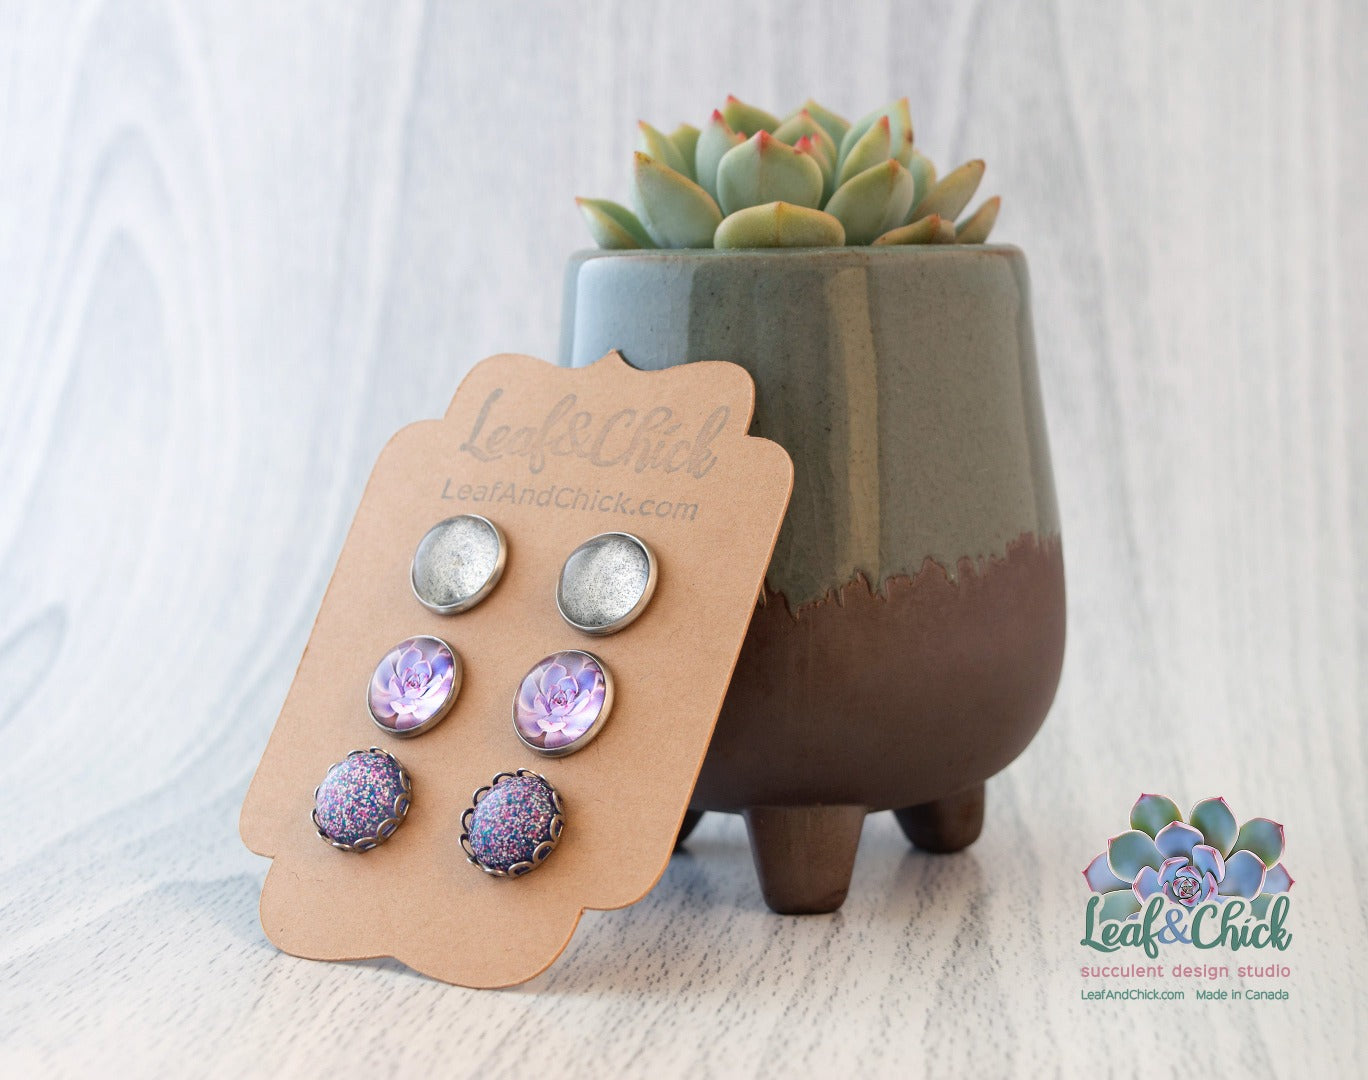 stainless steel stud earrings with purple succulent art and coordinating styles